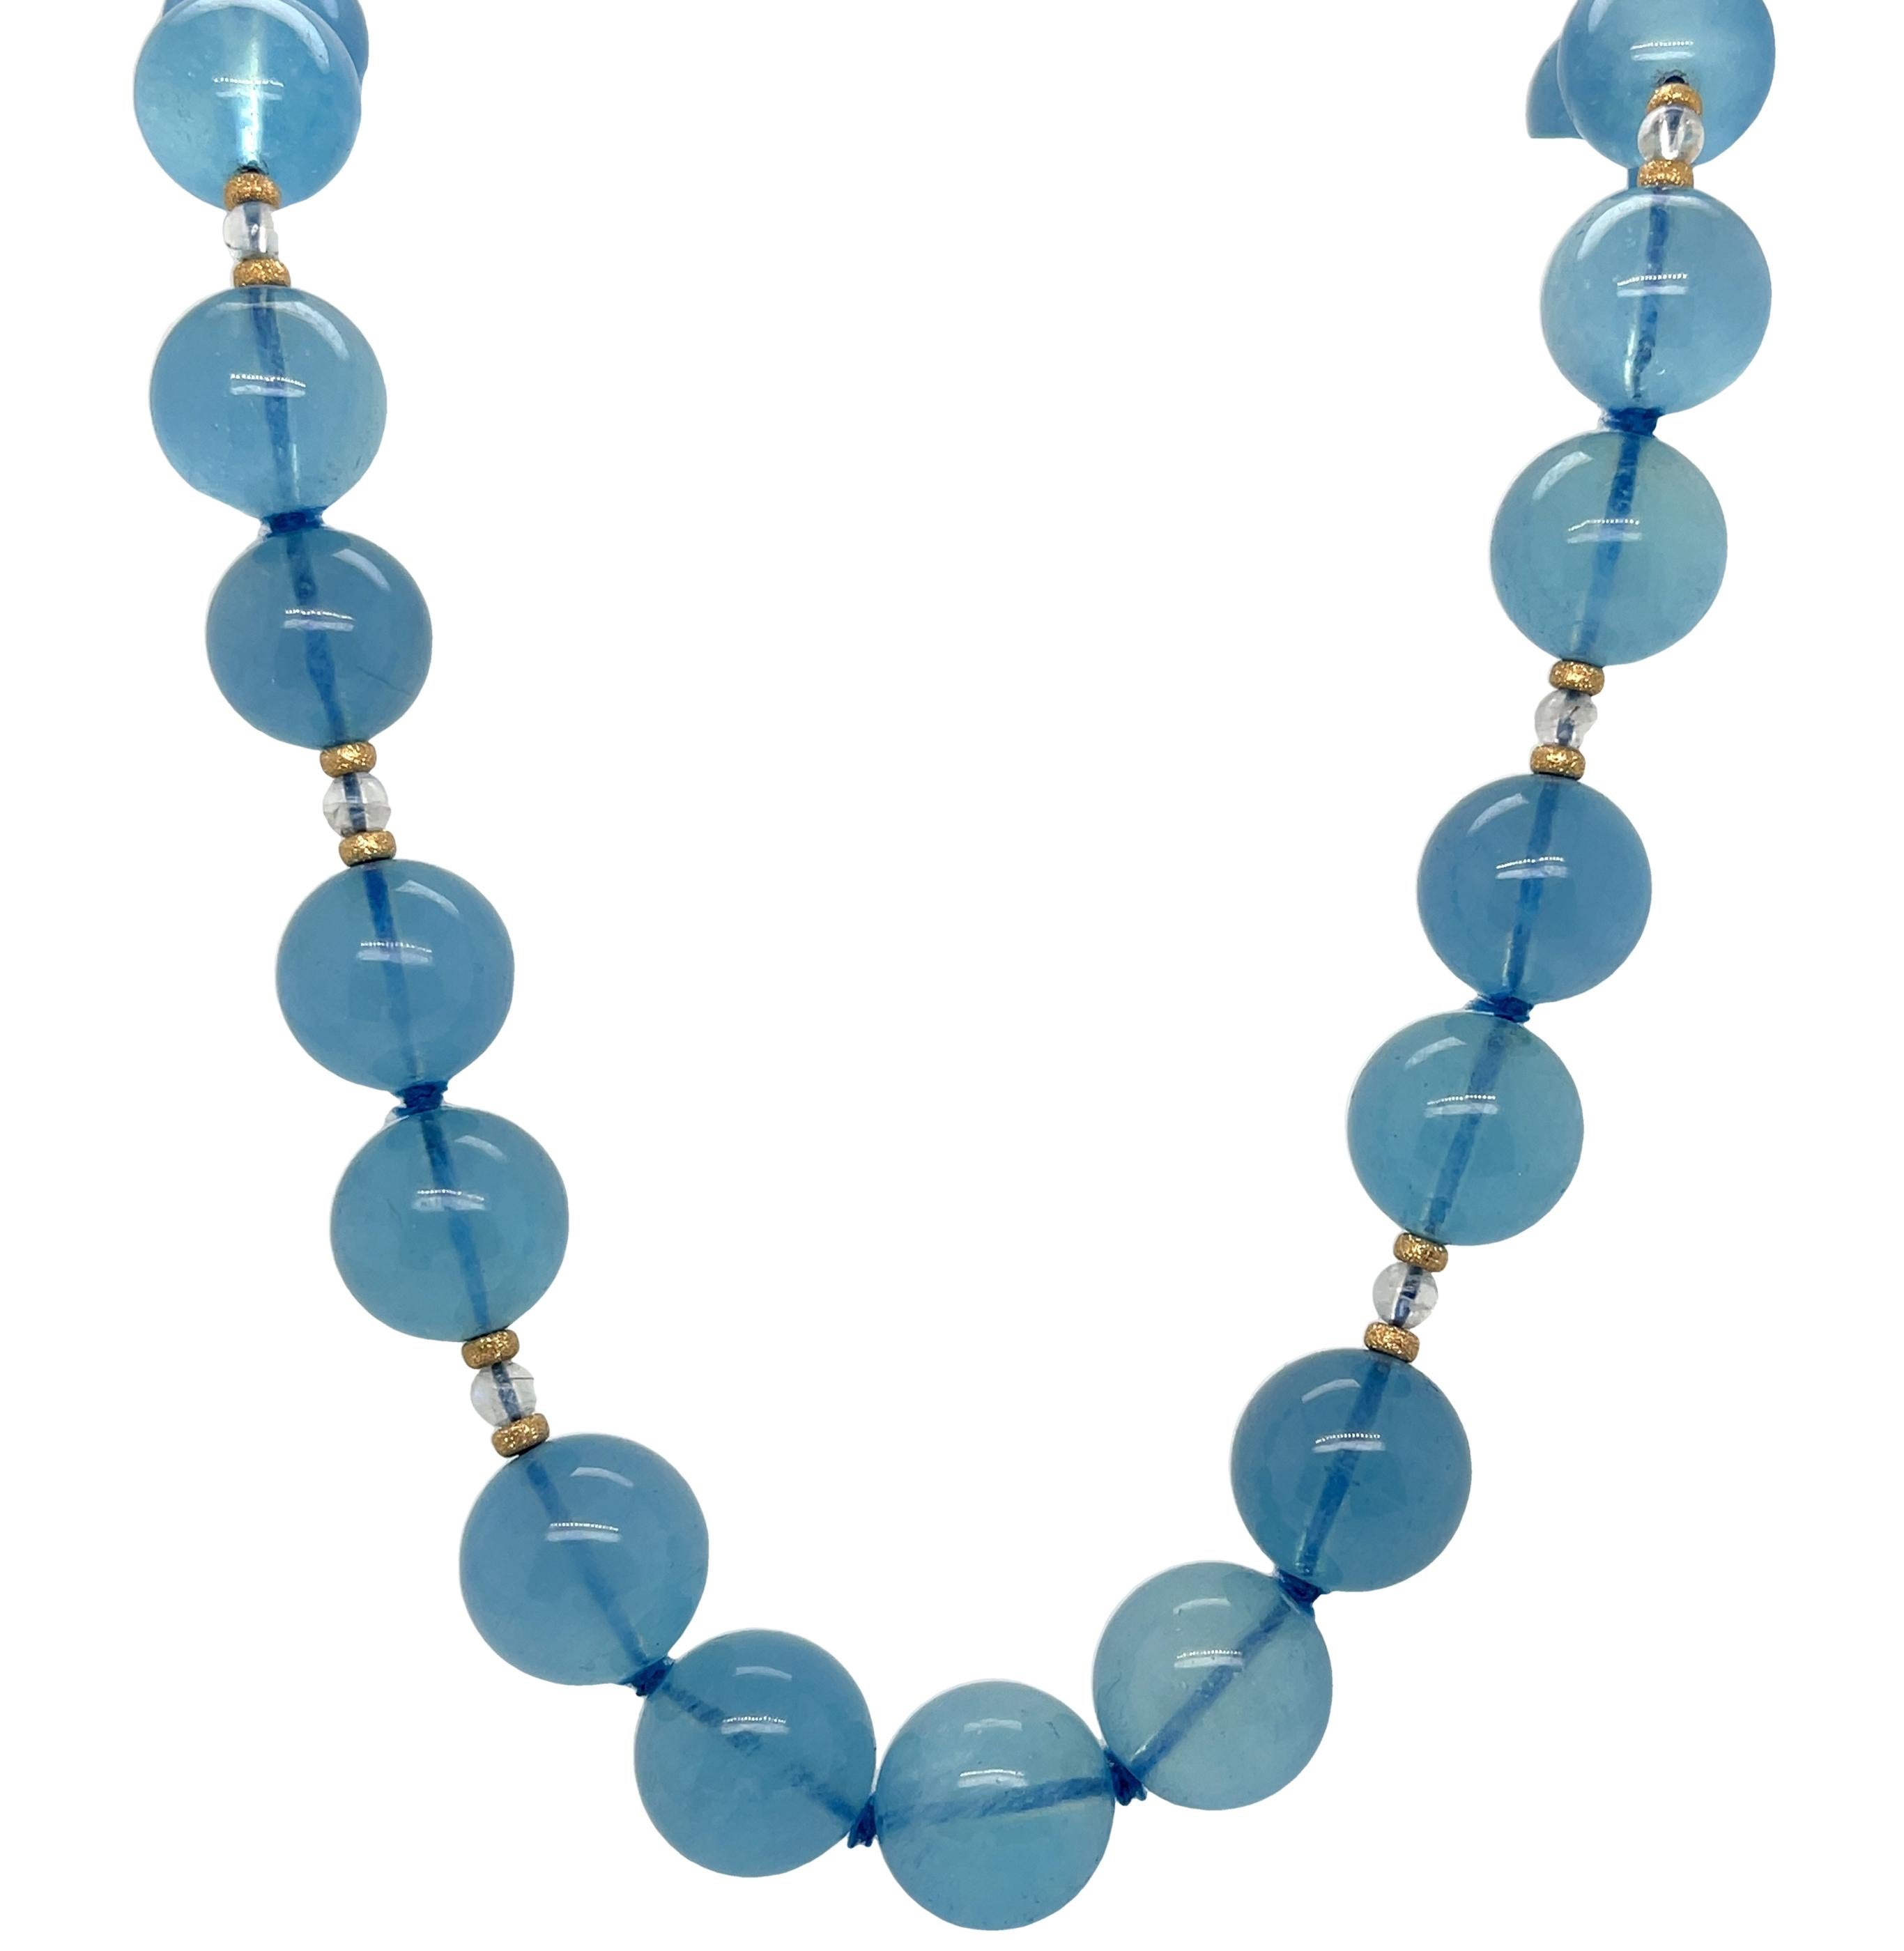 This gorgeous aquamarine necklace features natural aquamarine beads in a deep blue color rarely seen.  These beads are impressive in size, measuring 13-14mm in diameter, with beautiful translucence and even coloring. The aquamarines have been